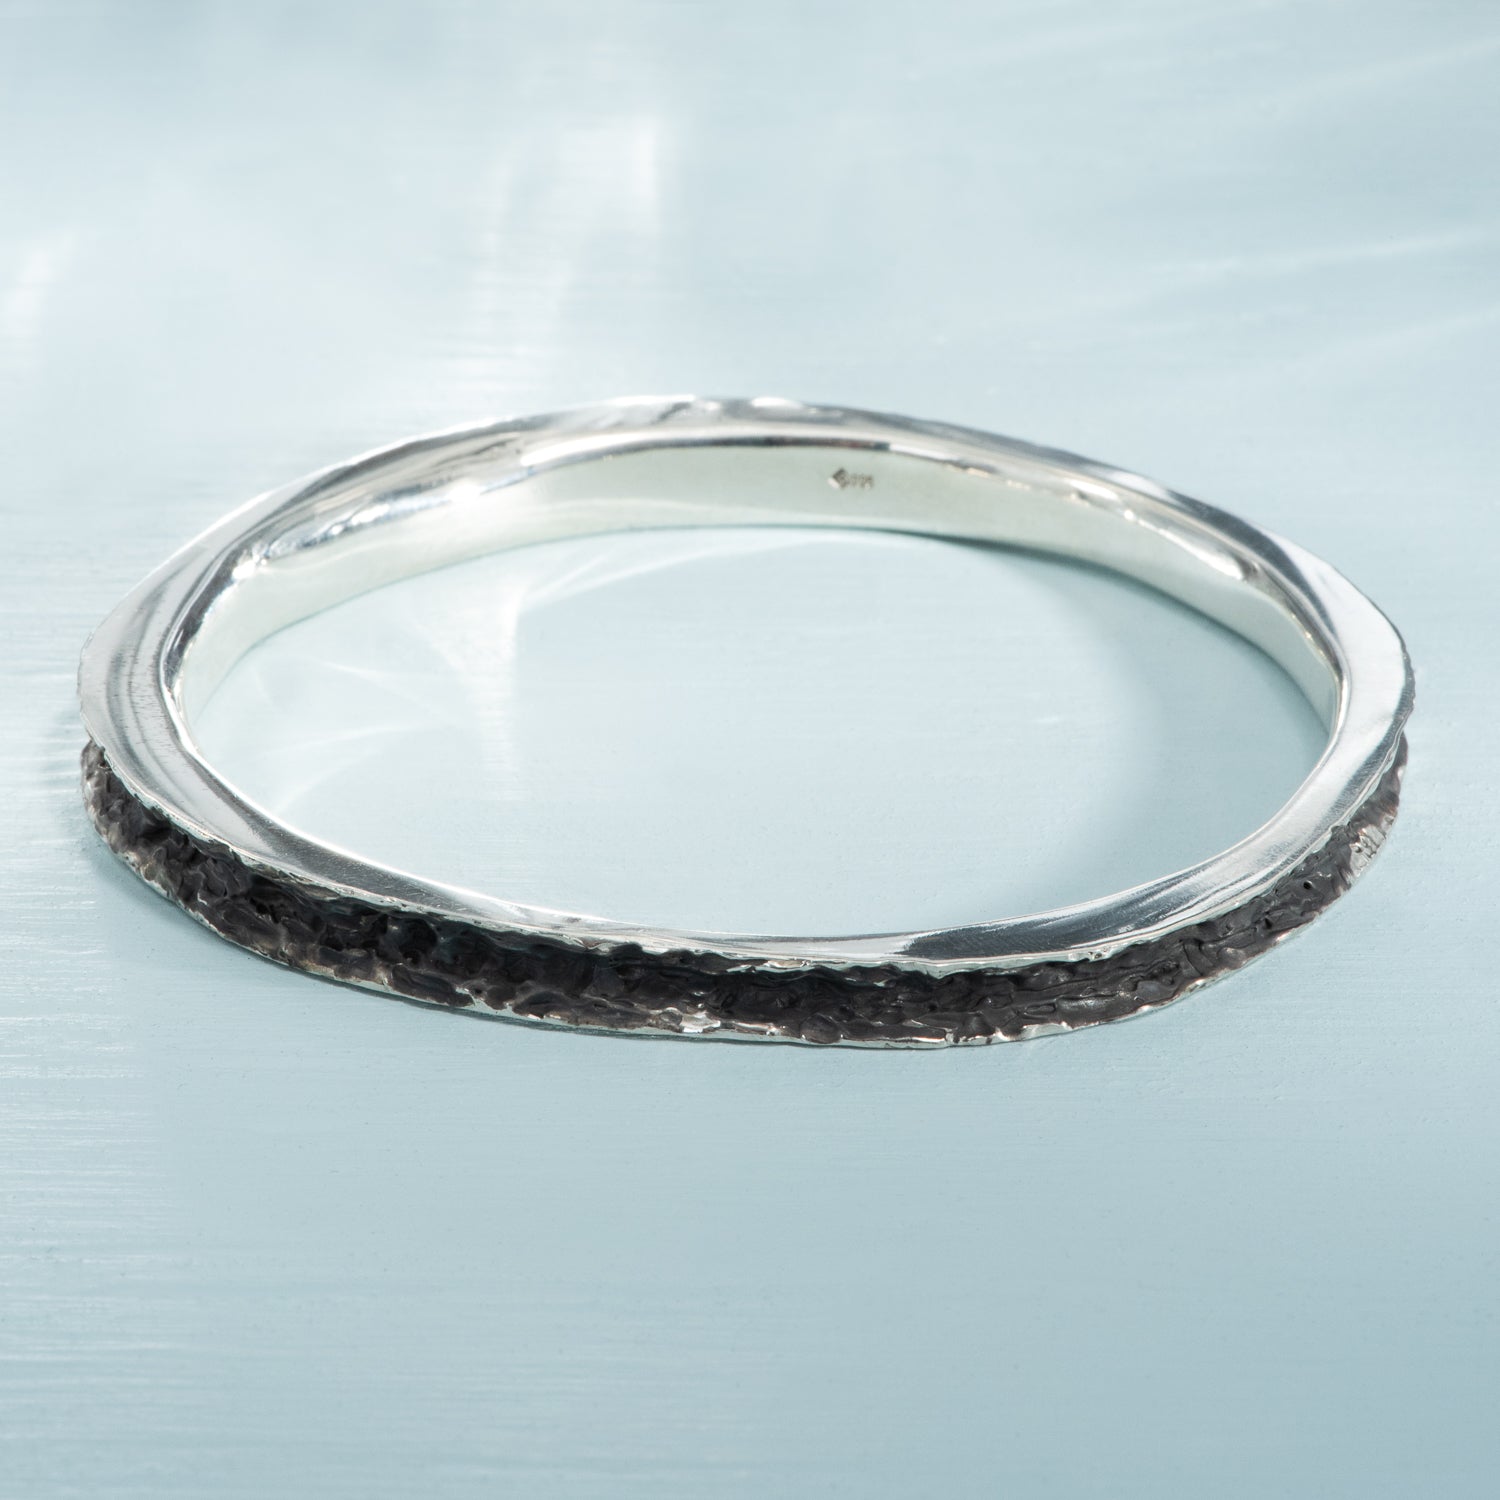 A textured, oxidized silver bangle bracelet, with a thin rim of polished silver.